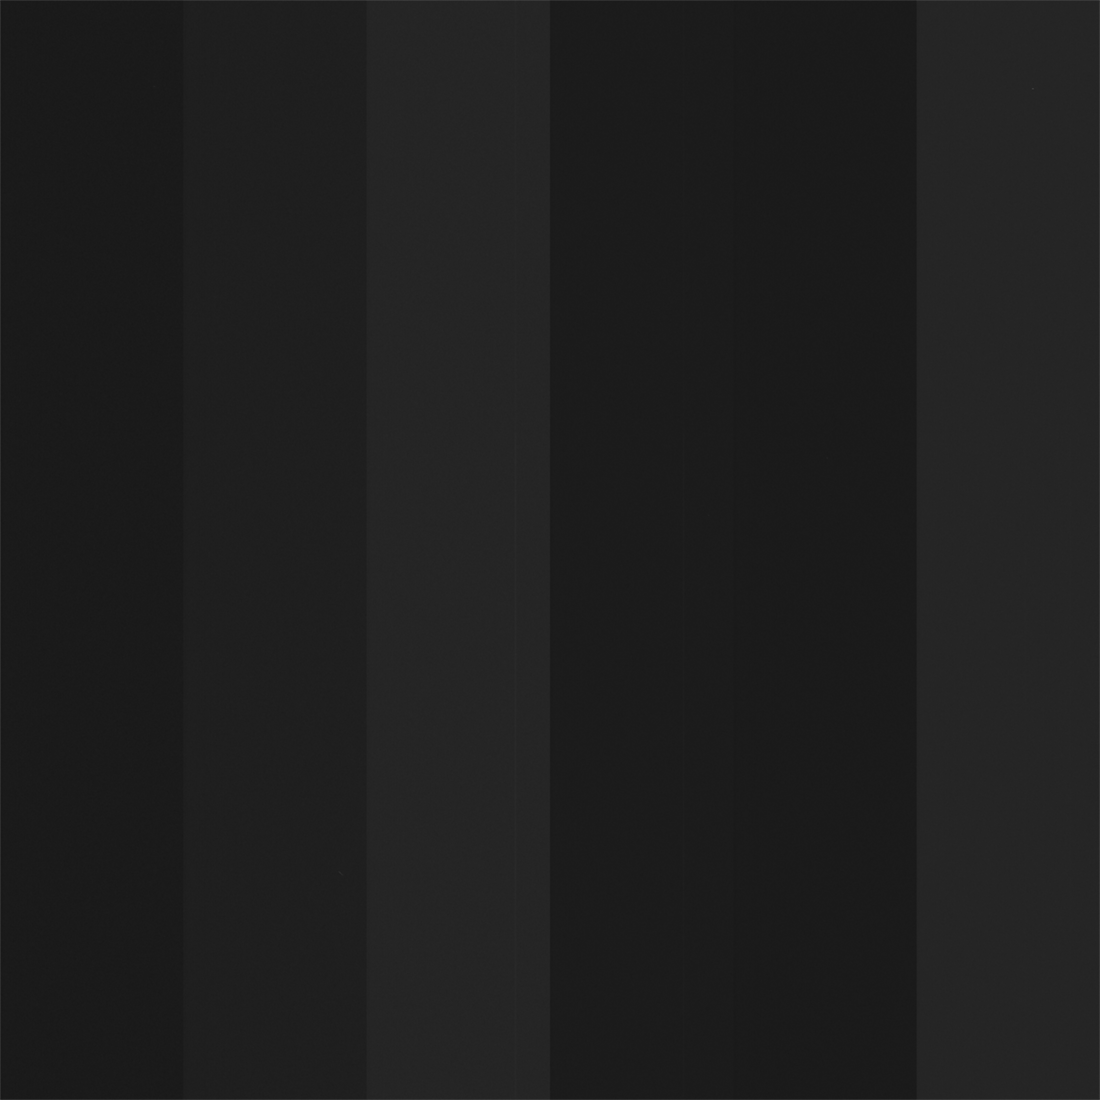 A series of five stacked (top to bottom) ShadowCam calibration images, or dark images, with each image showing six channels from left to right in various brightness levels. 